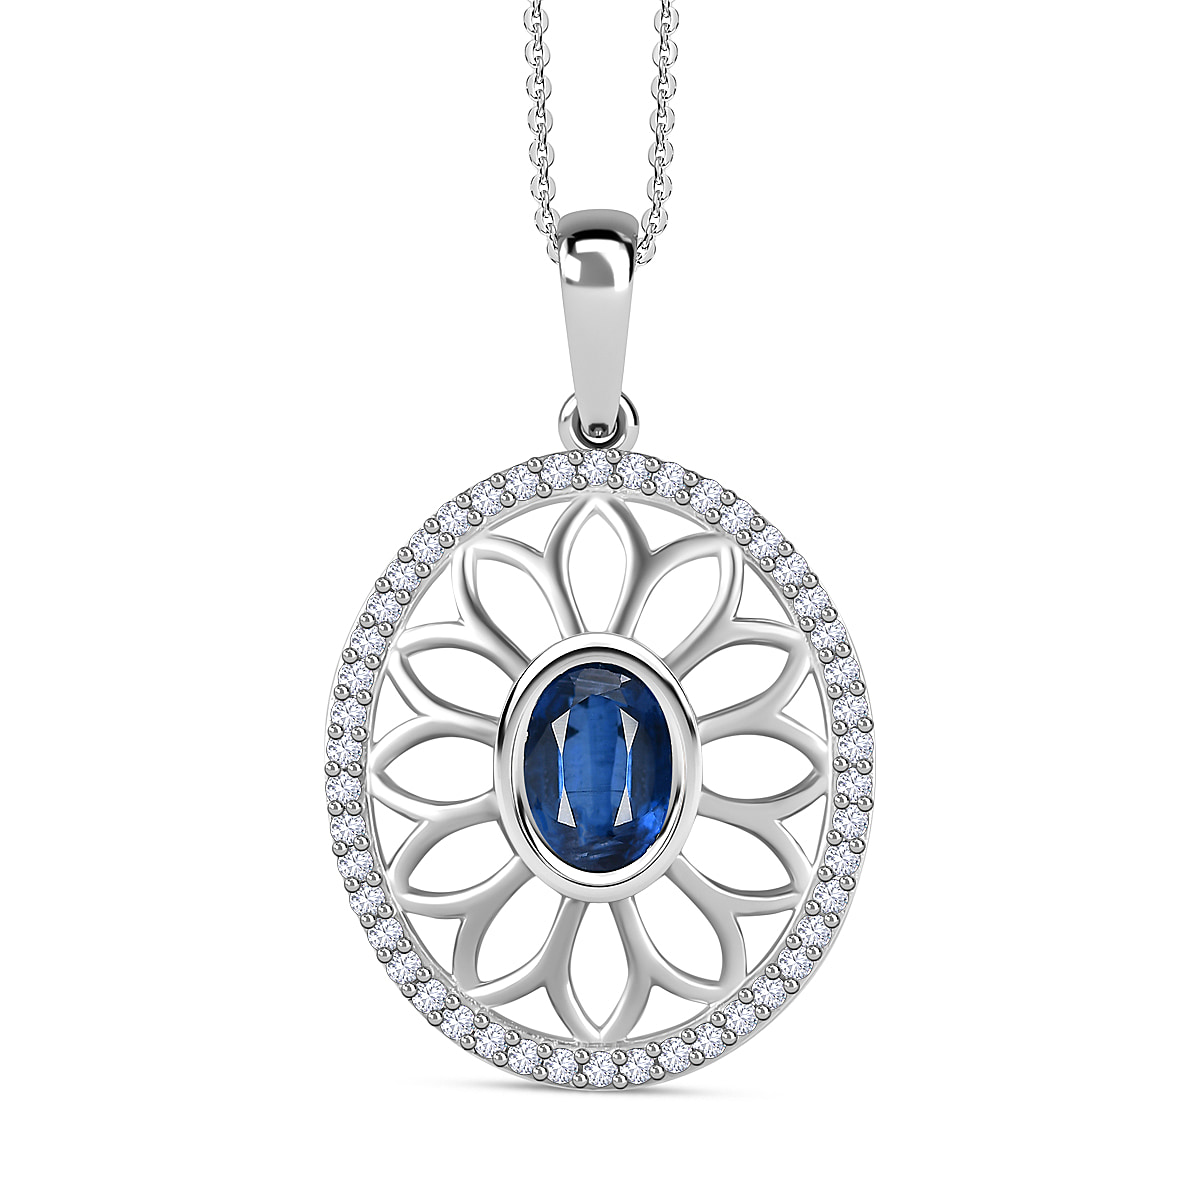 Natural Himalayan Kyanite & White Zircon Pendant with Chain (Size 20) in Platinum Overlay Sterling Silver 1.55 Ct.